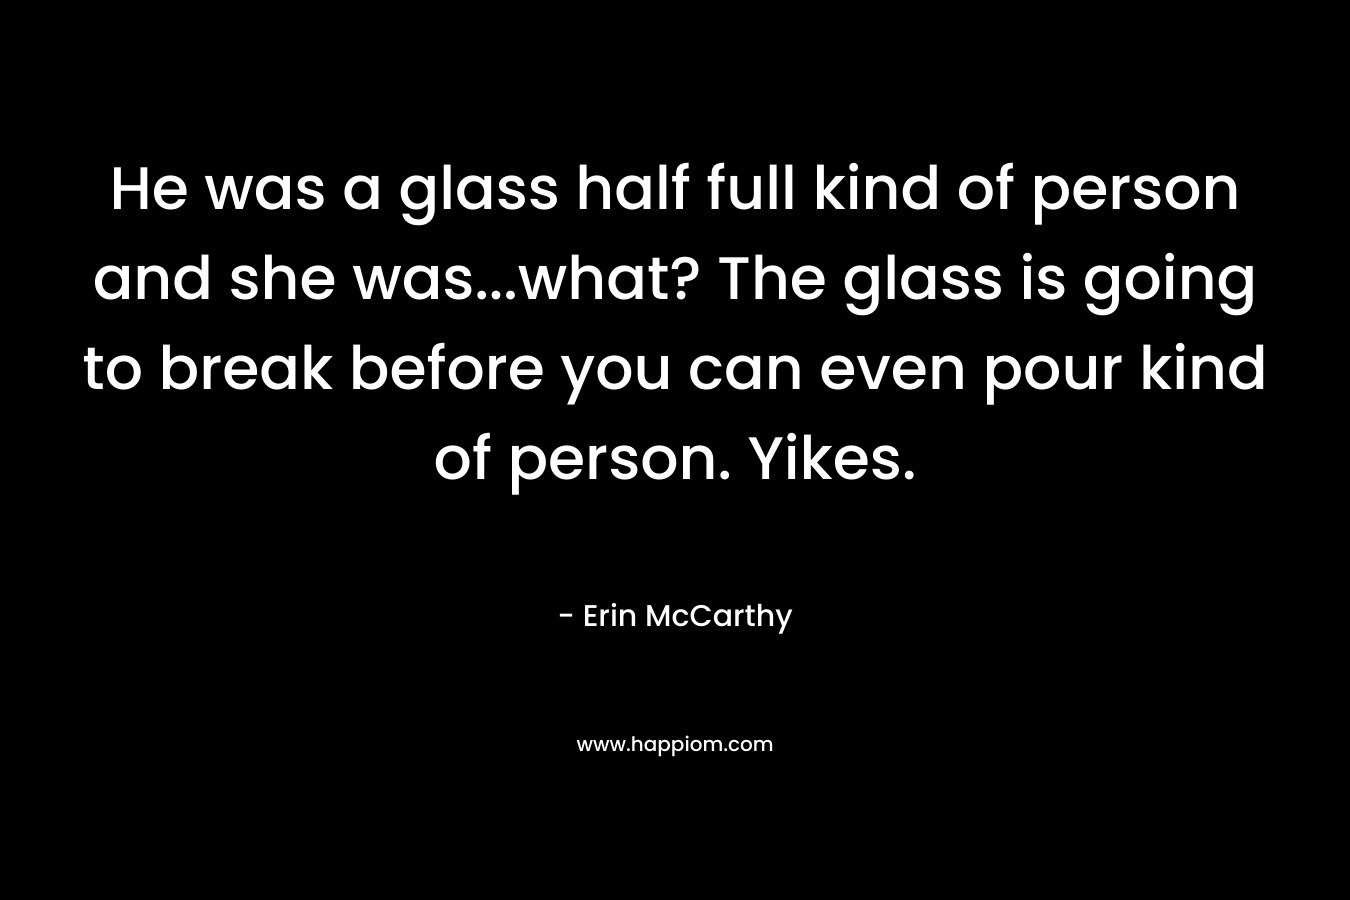 He was a glass half full kind of person and she was...what? The glass is going to break before you can even pour kind of person. Yikes.